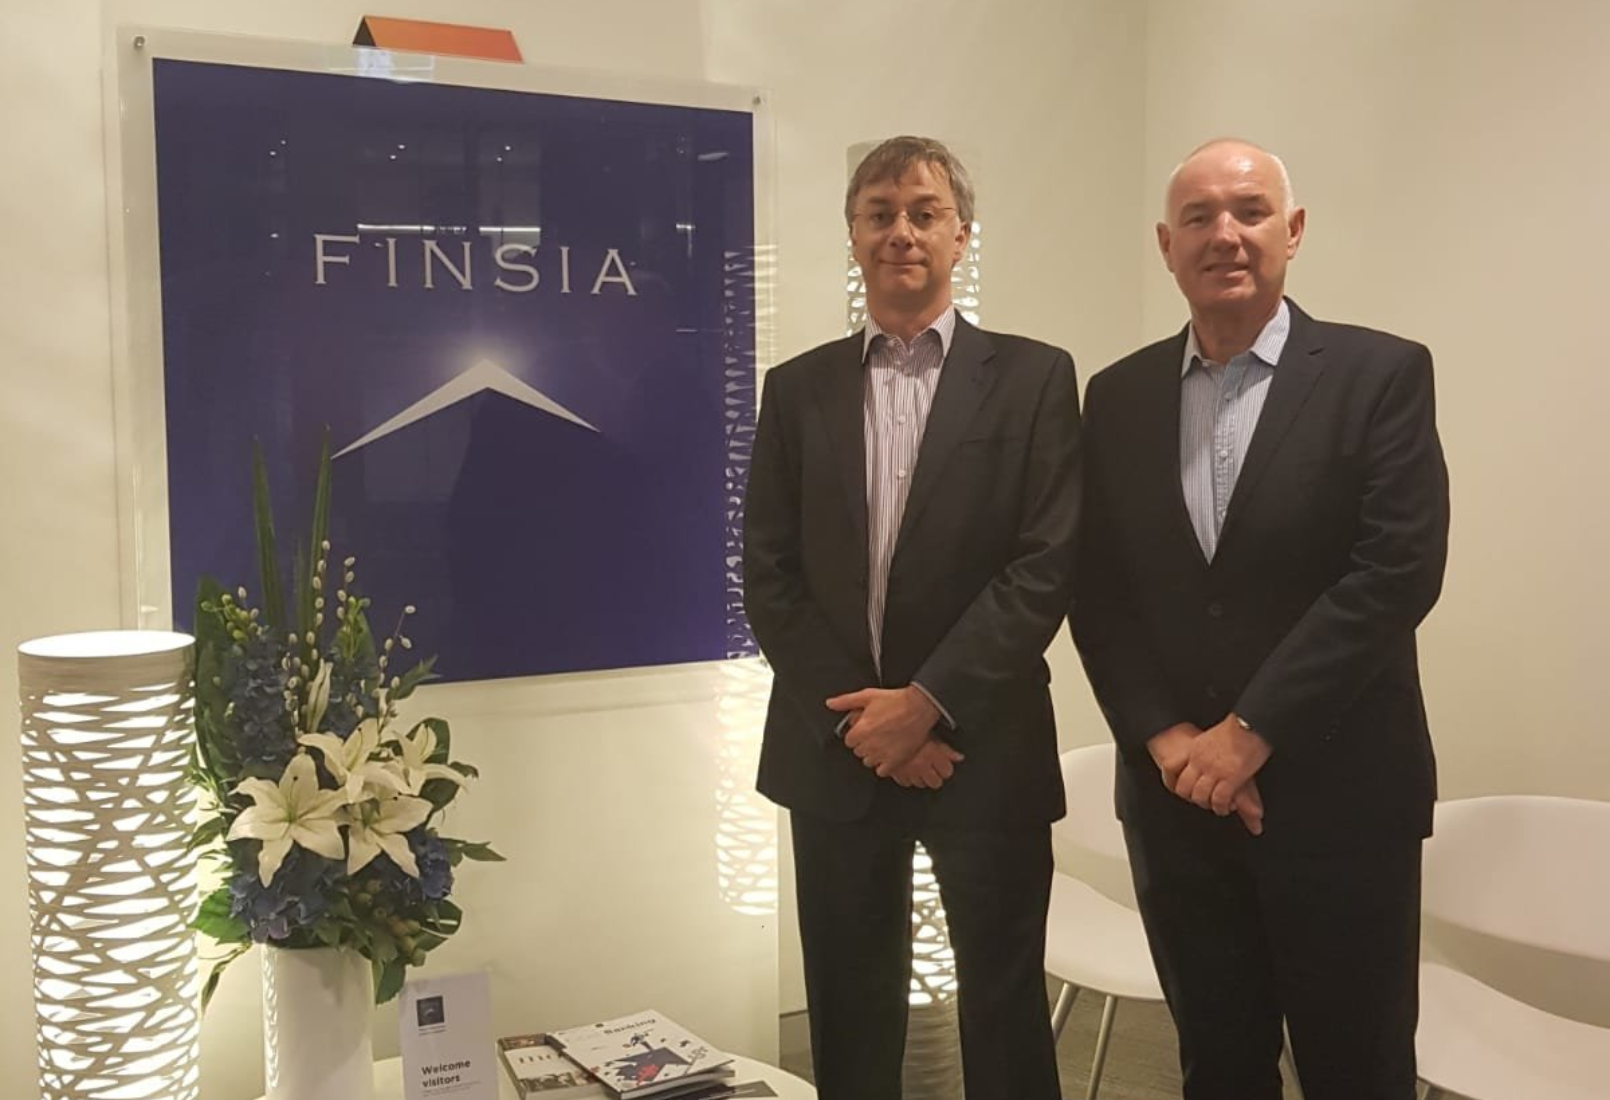 Professional Qualifications, Royal Commission submission and the UK experience - Chris Whitehead, CEO FINSIA and Giles Cuthbert, Managing Director CBI